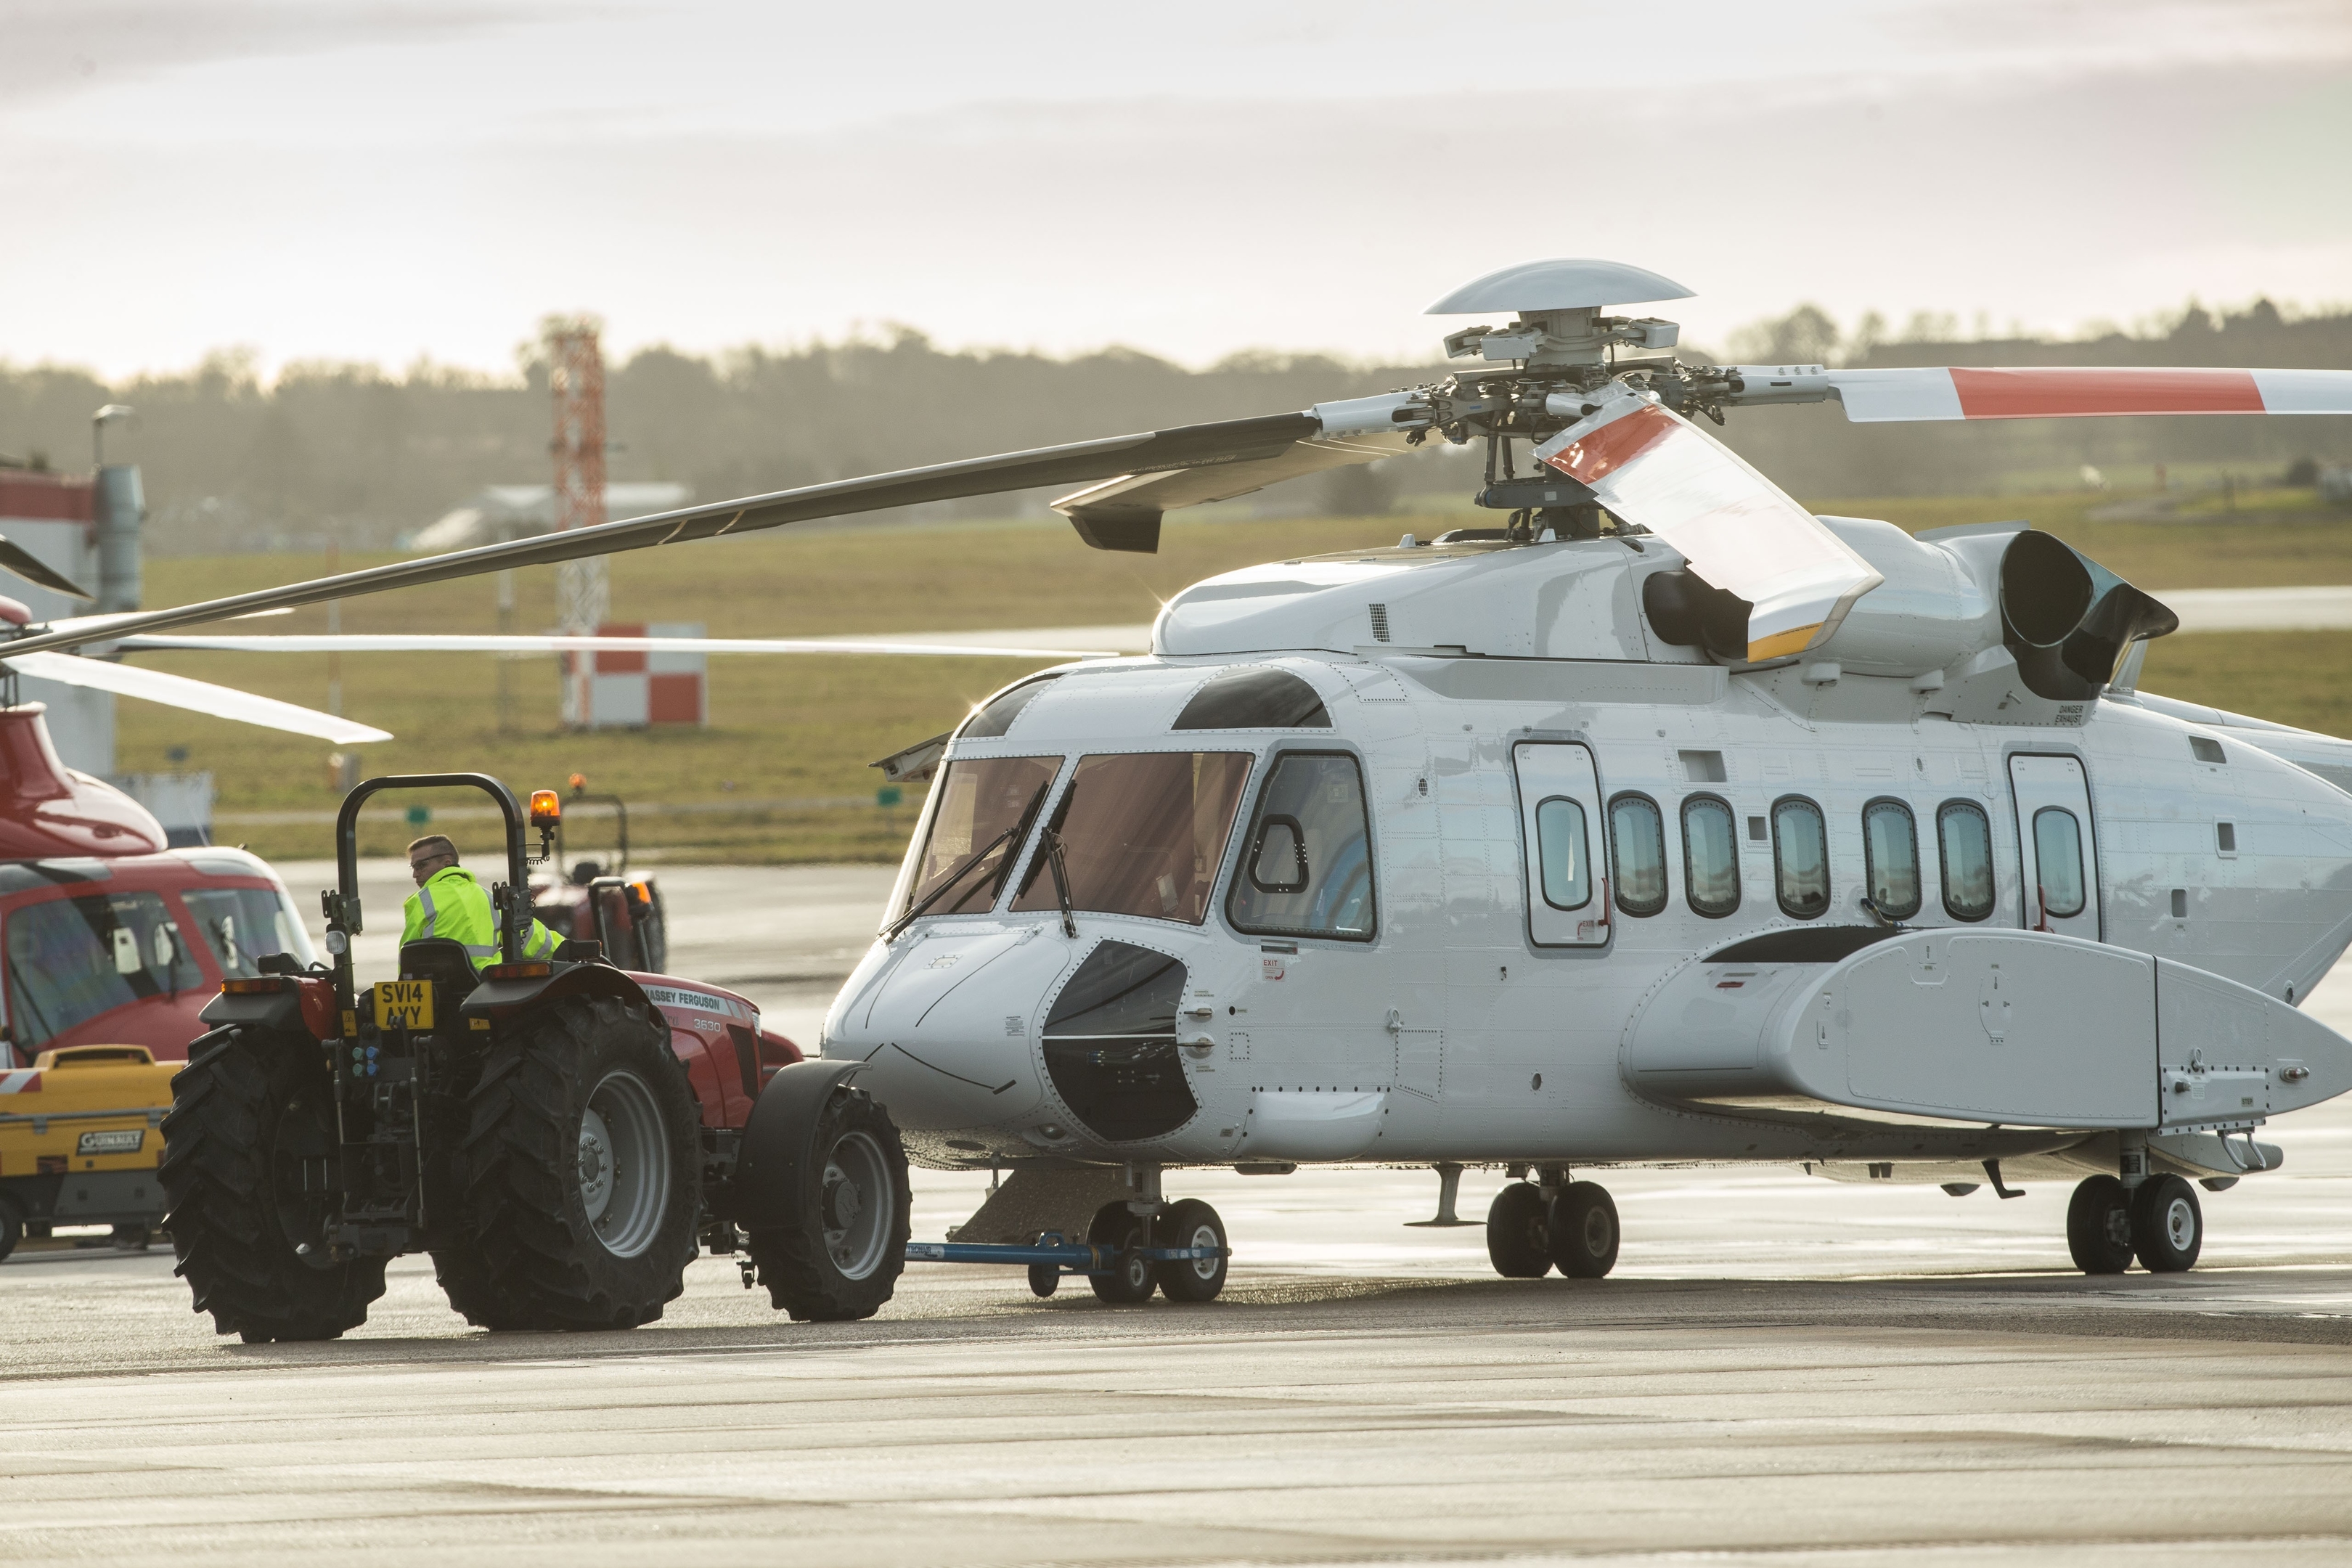 S-92 helicopters have to undergo mandatory checks before they are able to fly